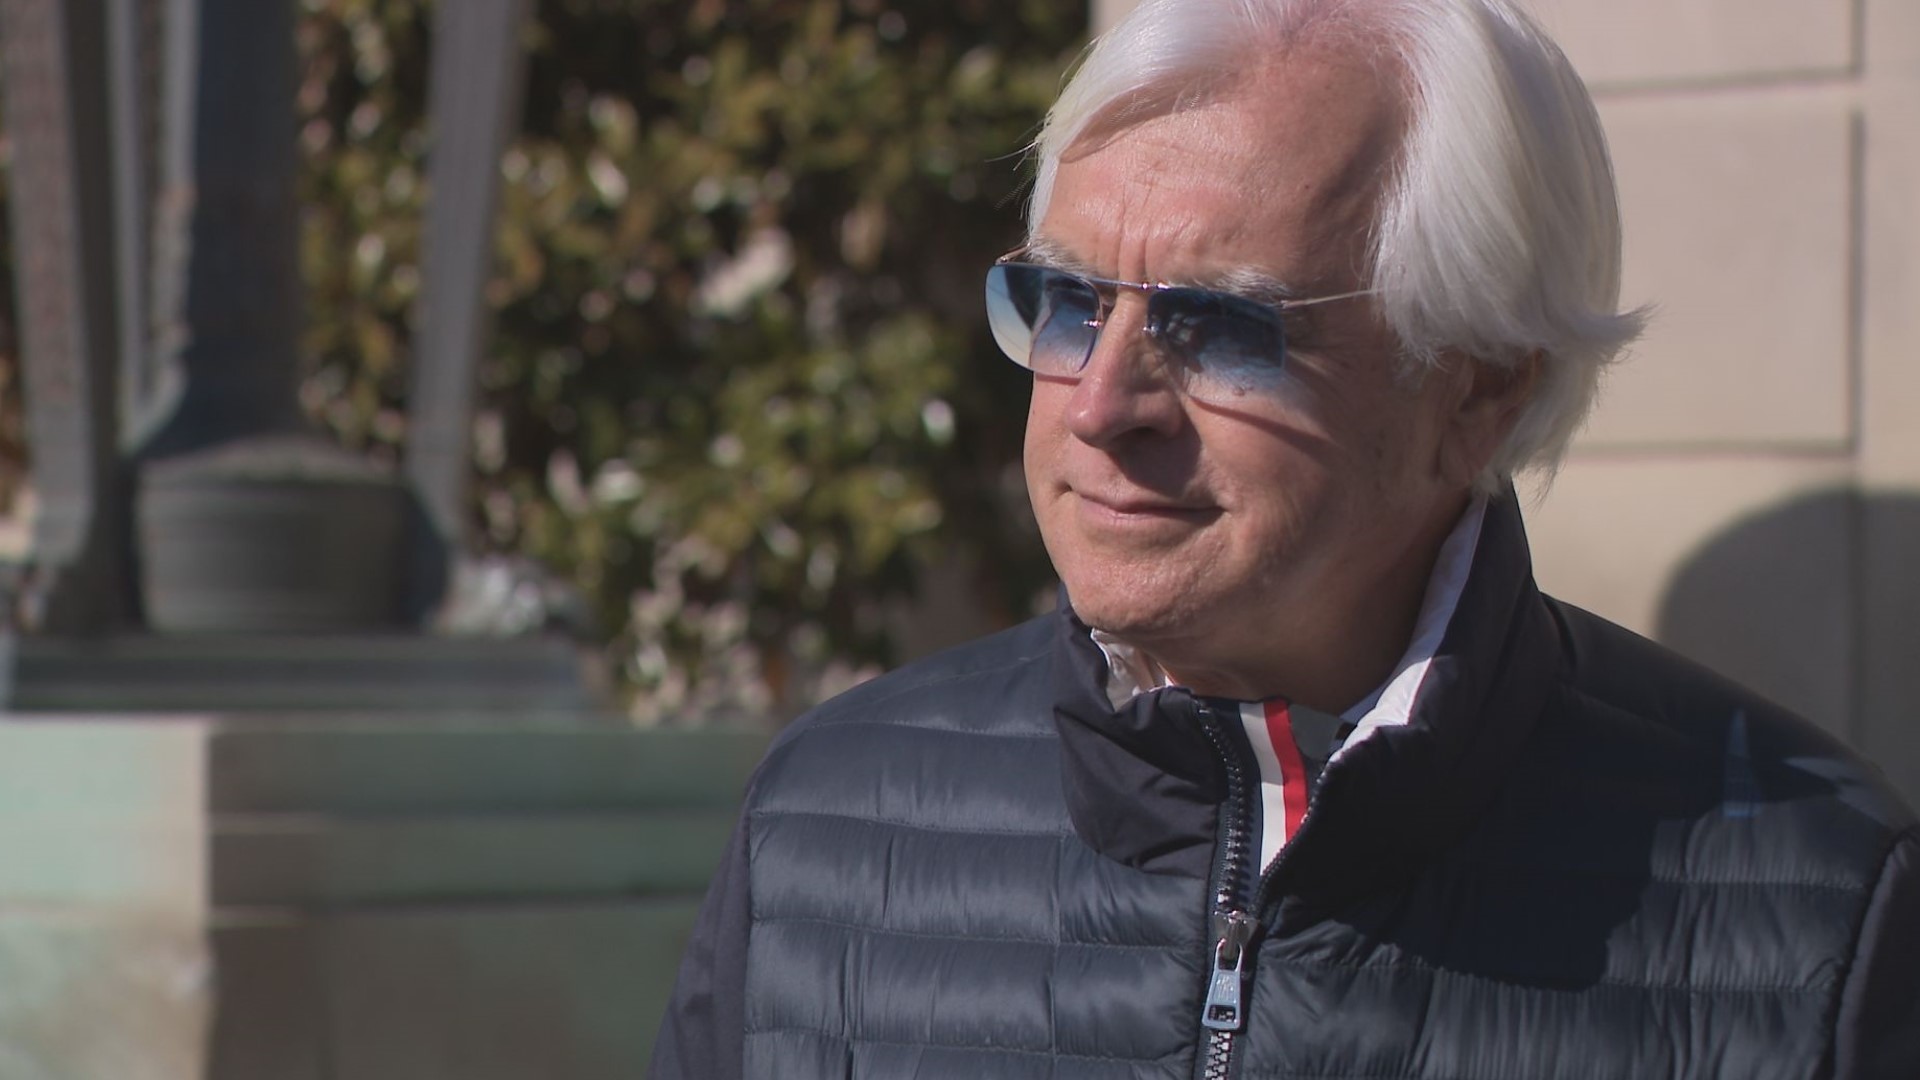 Baffert was in federal court for a second day of hearings to fight for his chance to race at this year's Kentucky Derby.